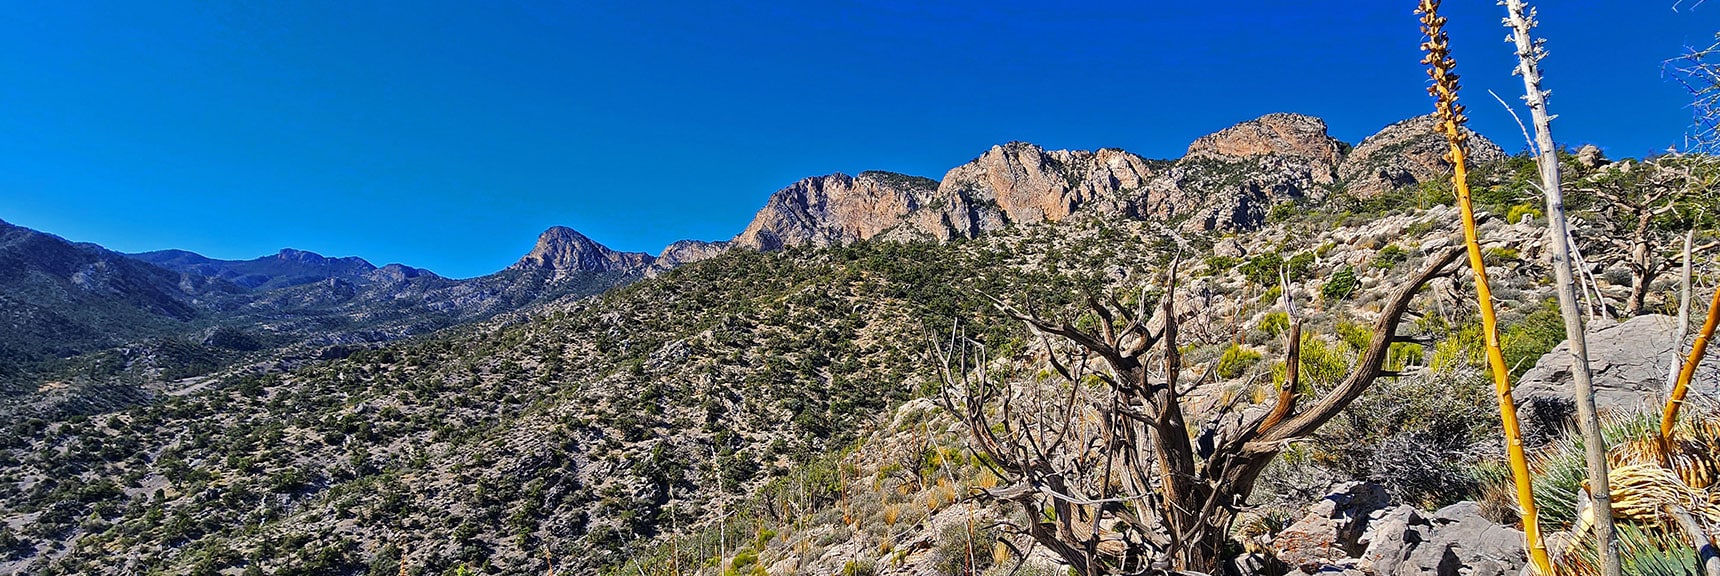 View Up the Ridgeline to Cliffs at the Base of the Wilson Ridge | Switchback Spring Ridge | Red Rock Canyon, Nevada